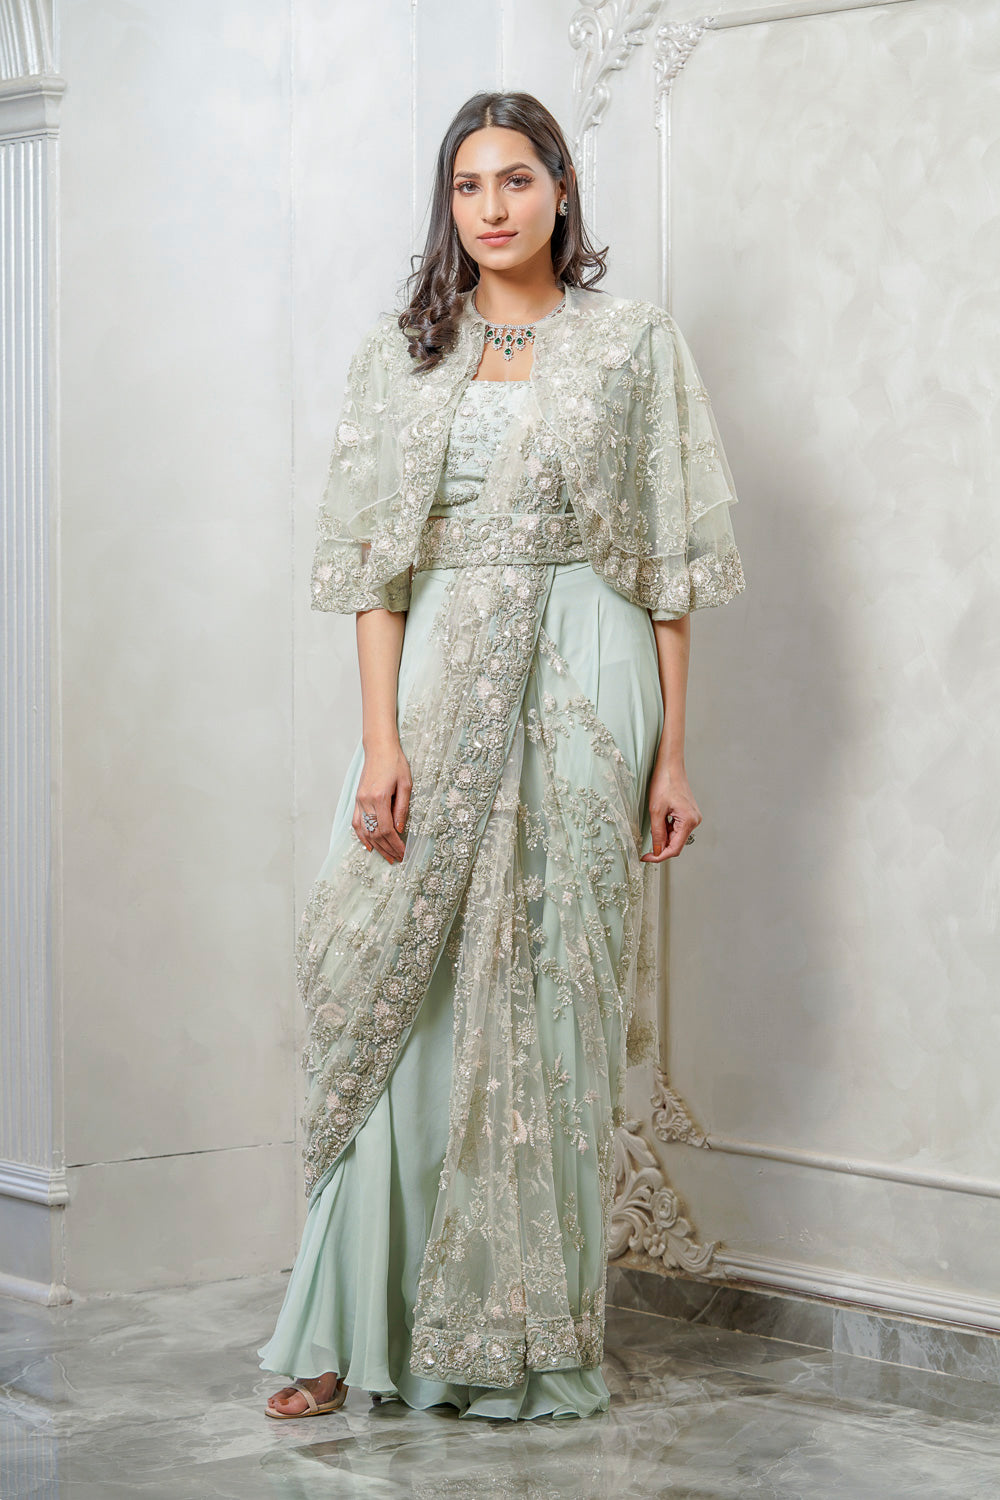 MINT GREEN PRE DRAPED CAPE EMBELLISHED SAREE – Swish By Dolcy & Simran